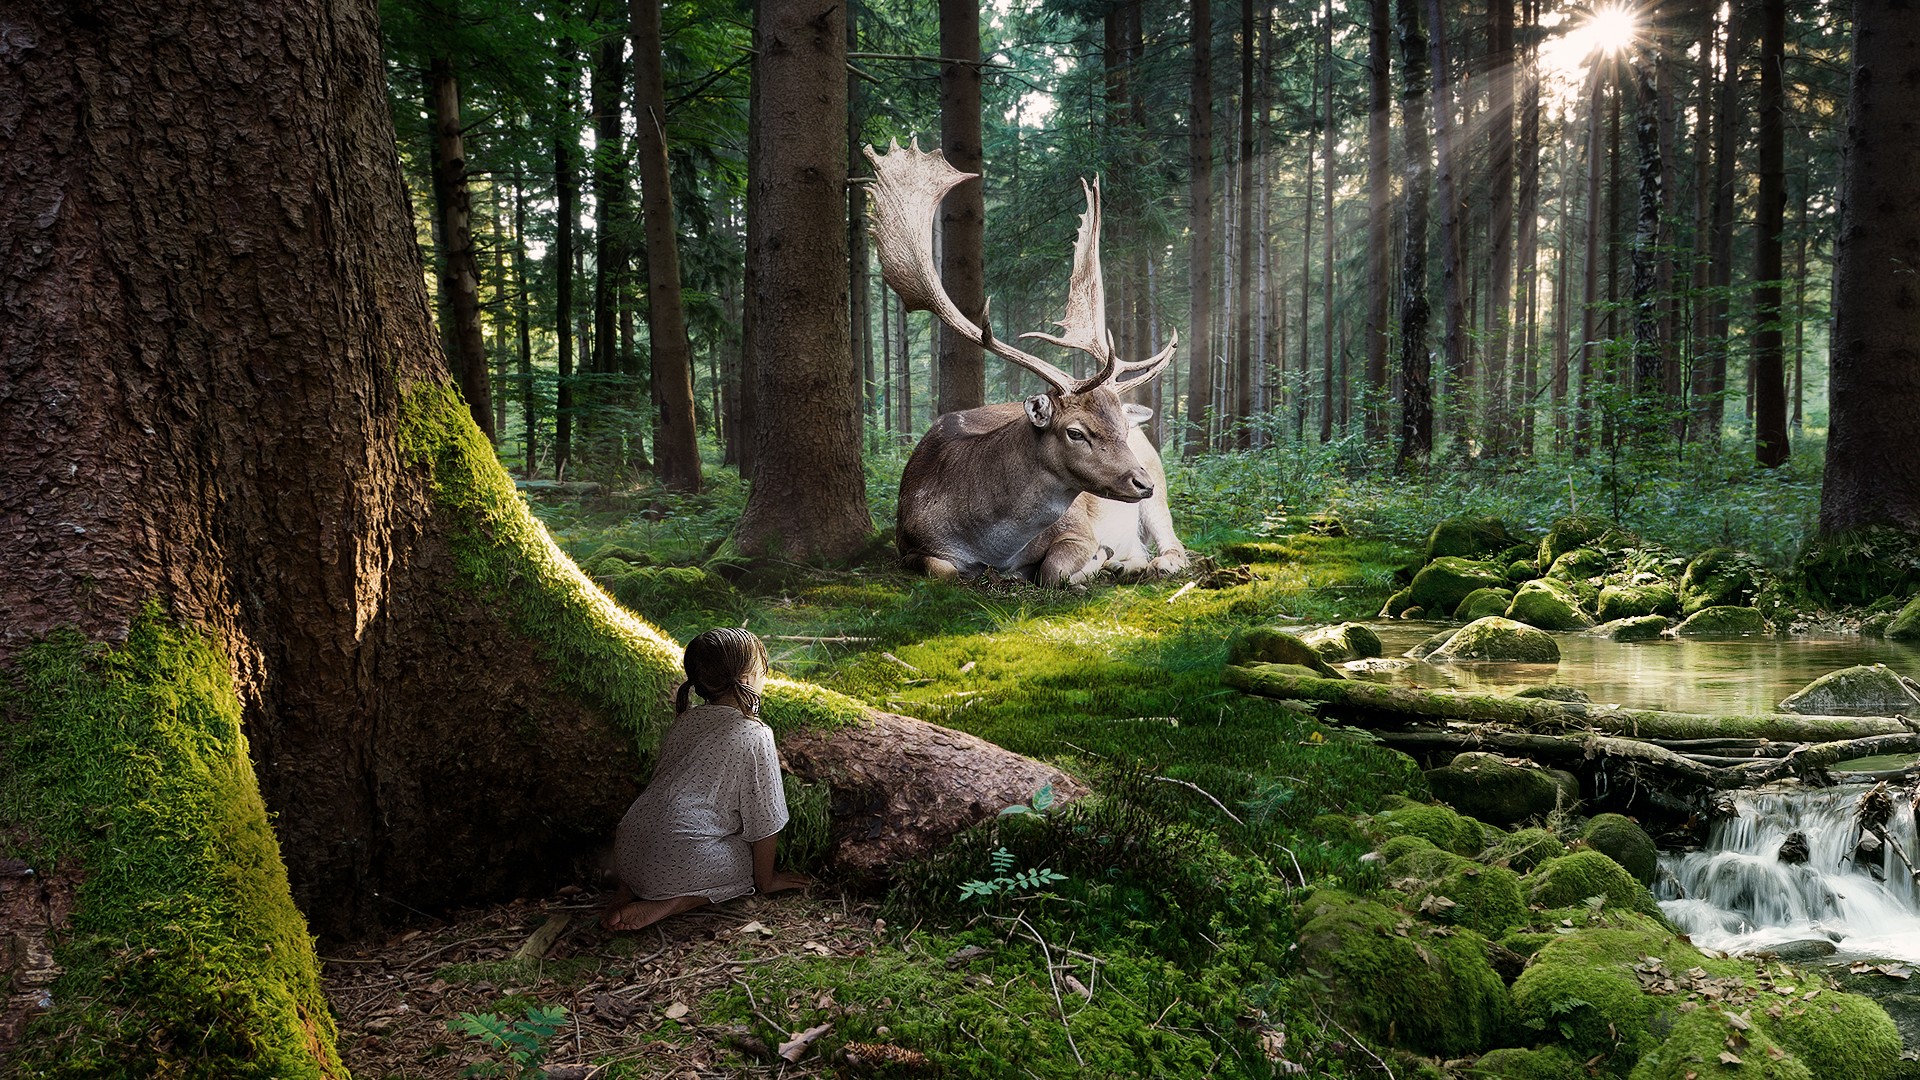 photography, manipulation, cgi, child, cute, elk, forest cellphone